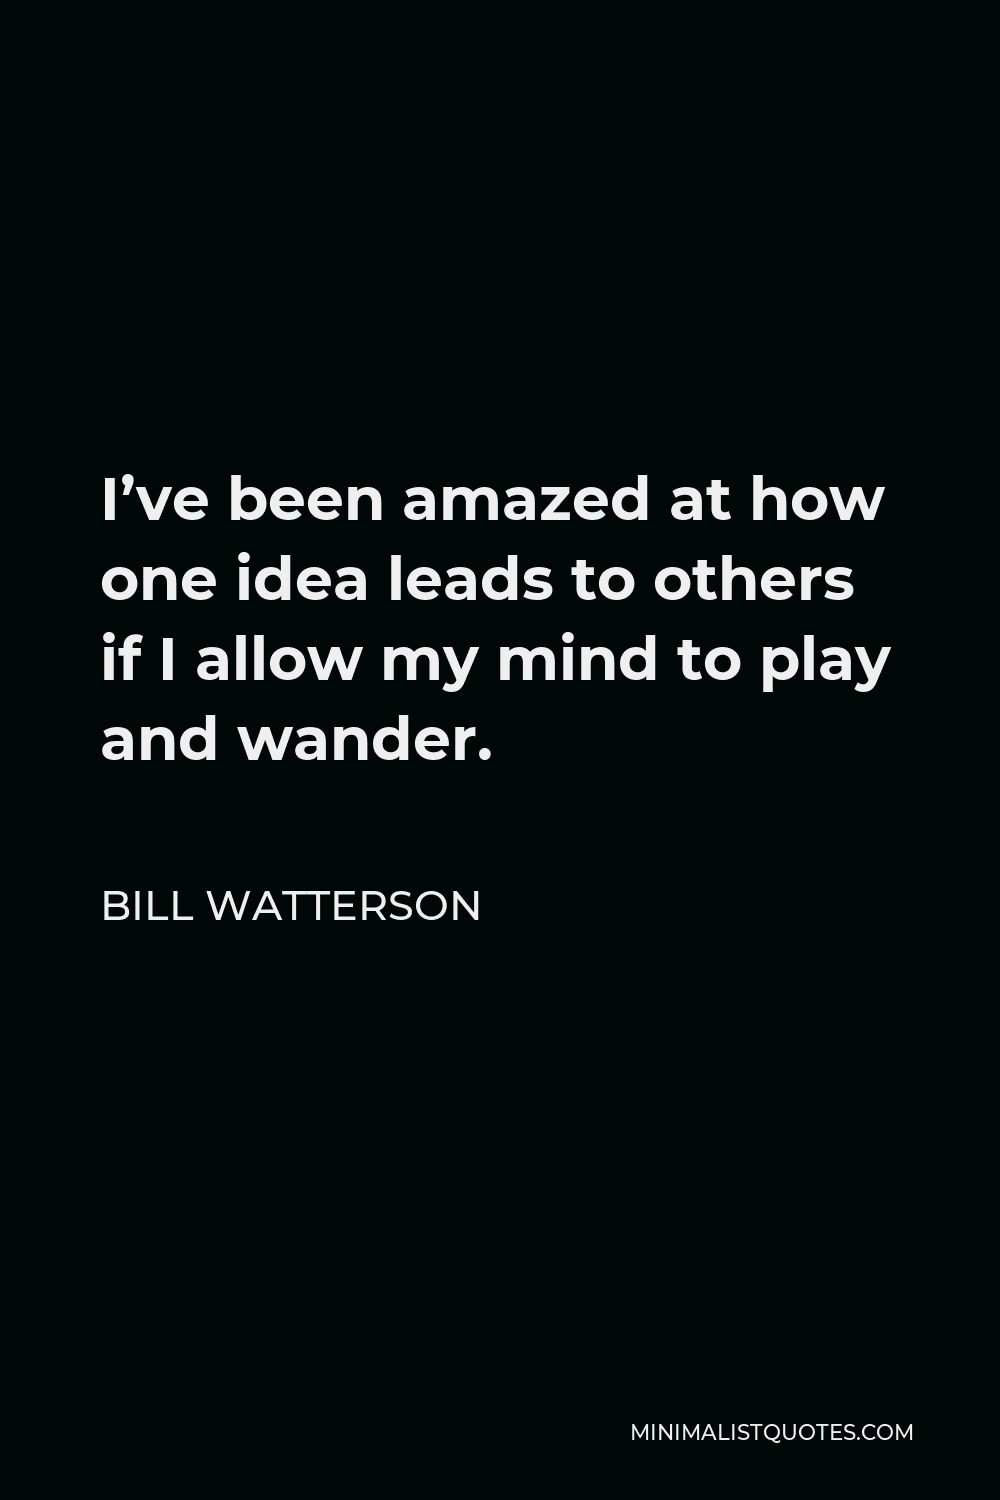 Bill Watterson Quote - I’ve been amazed at how one idea leads to others if I allow my mind to play and wander.